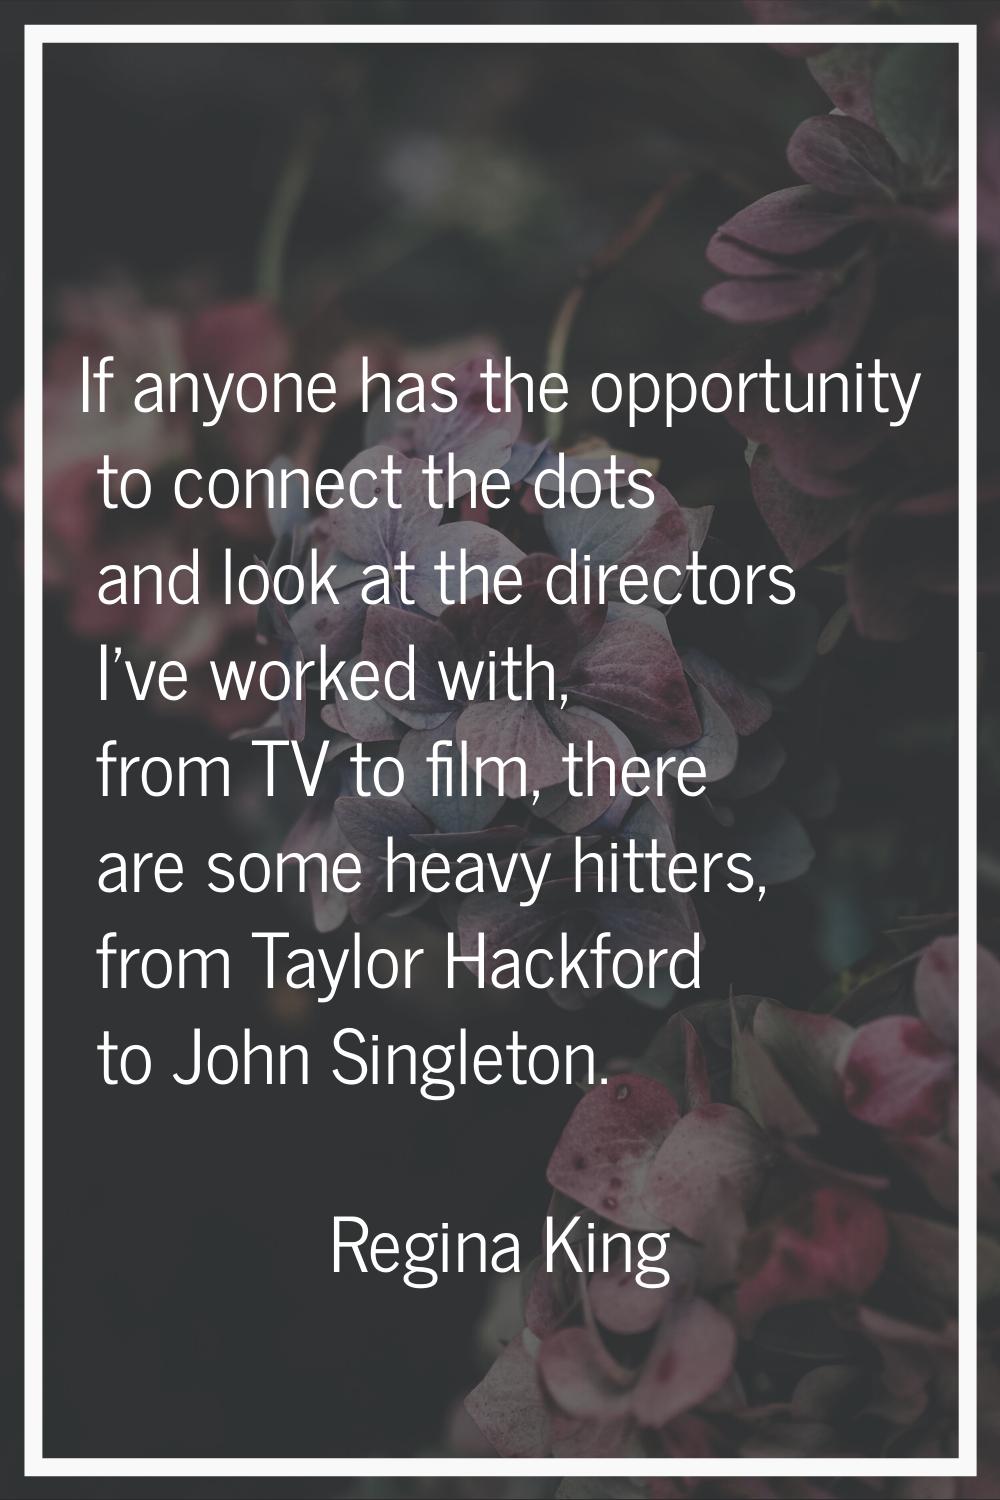 If anyone has the opportunity to connect the dots and look at the directors I've worked with, from 